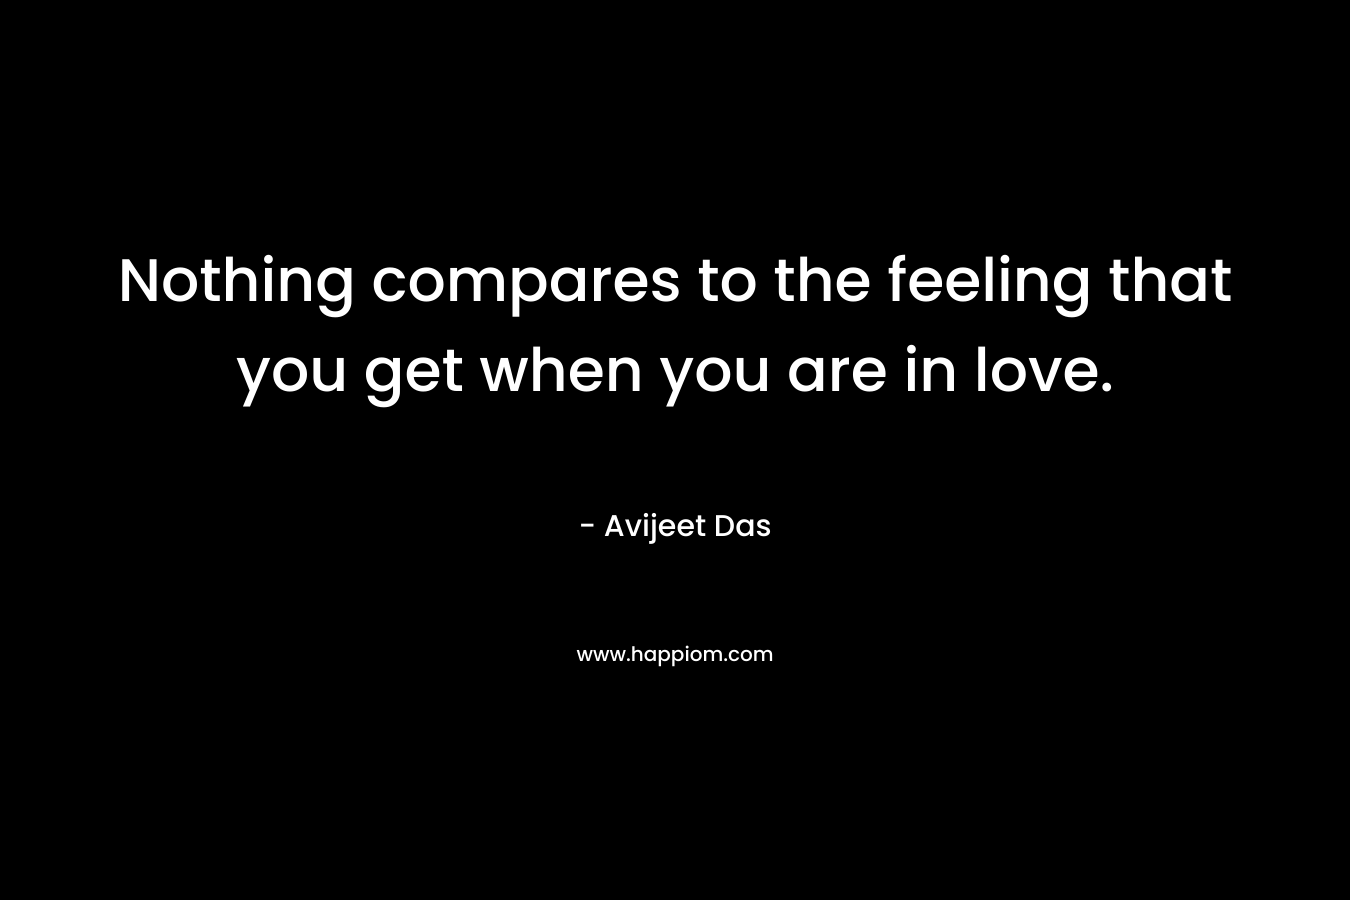 Nothing compares to the feeling that you get when you are in love.